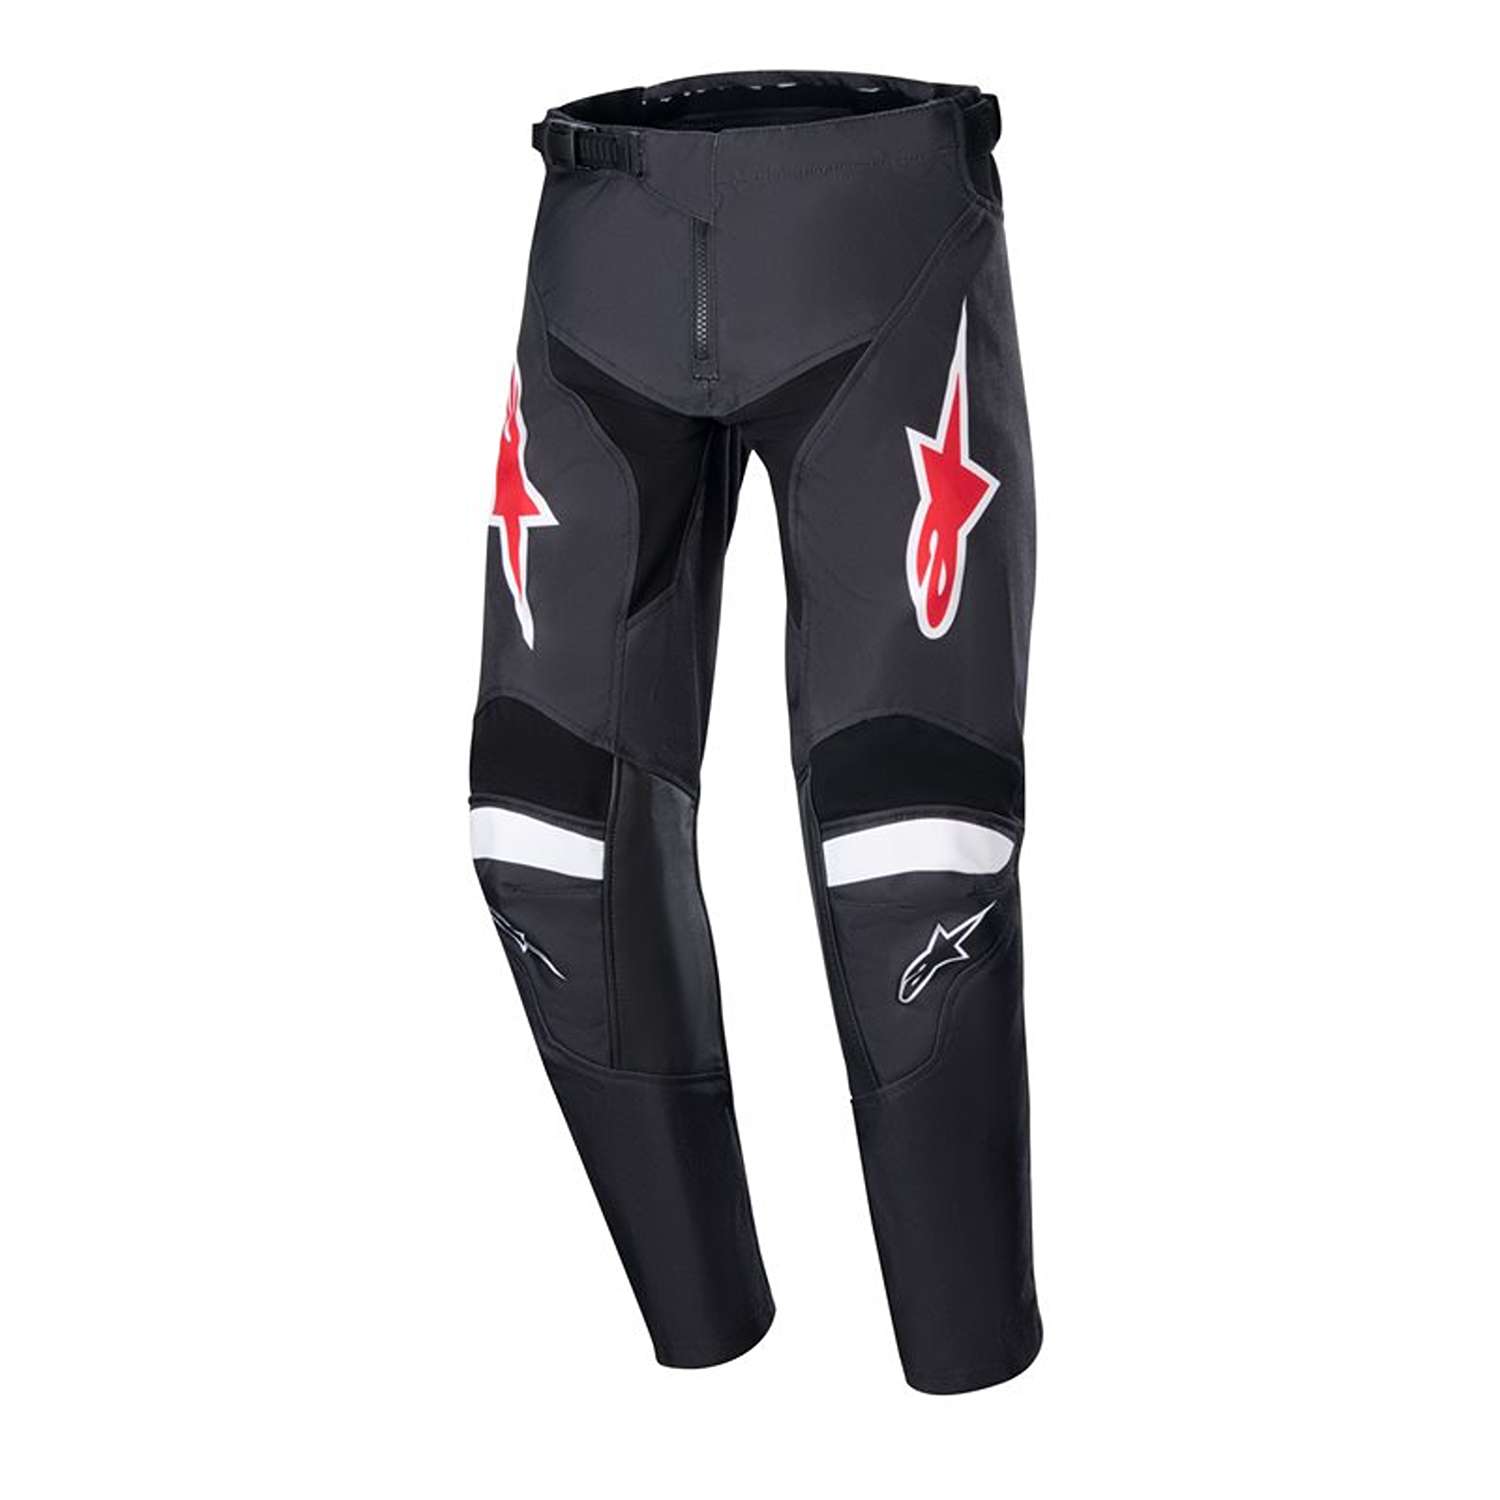 Image of Alpinestars Youth Racer Lucent Pants Black White Size 28 ID 8059347267456